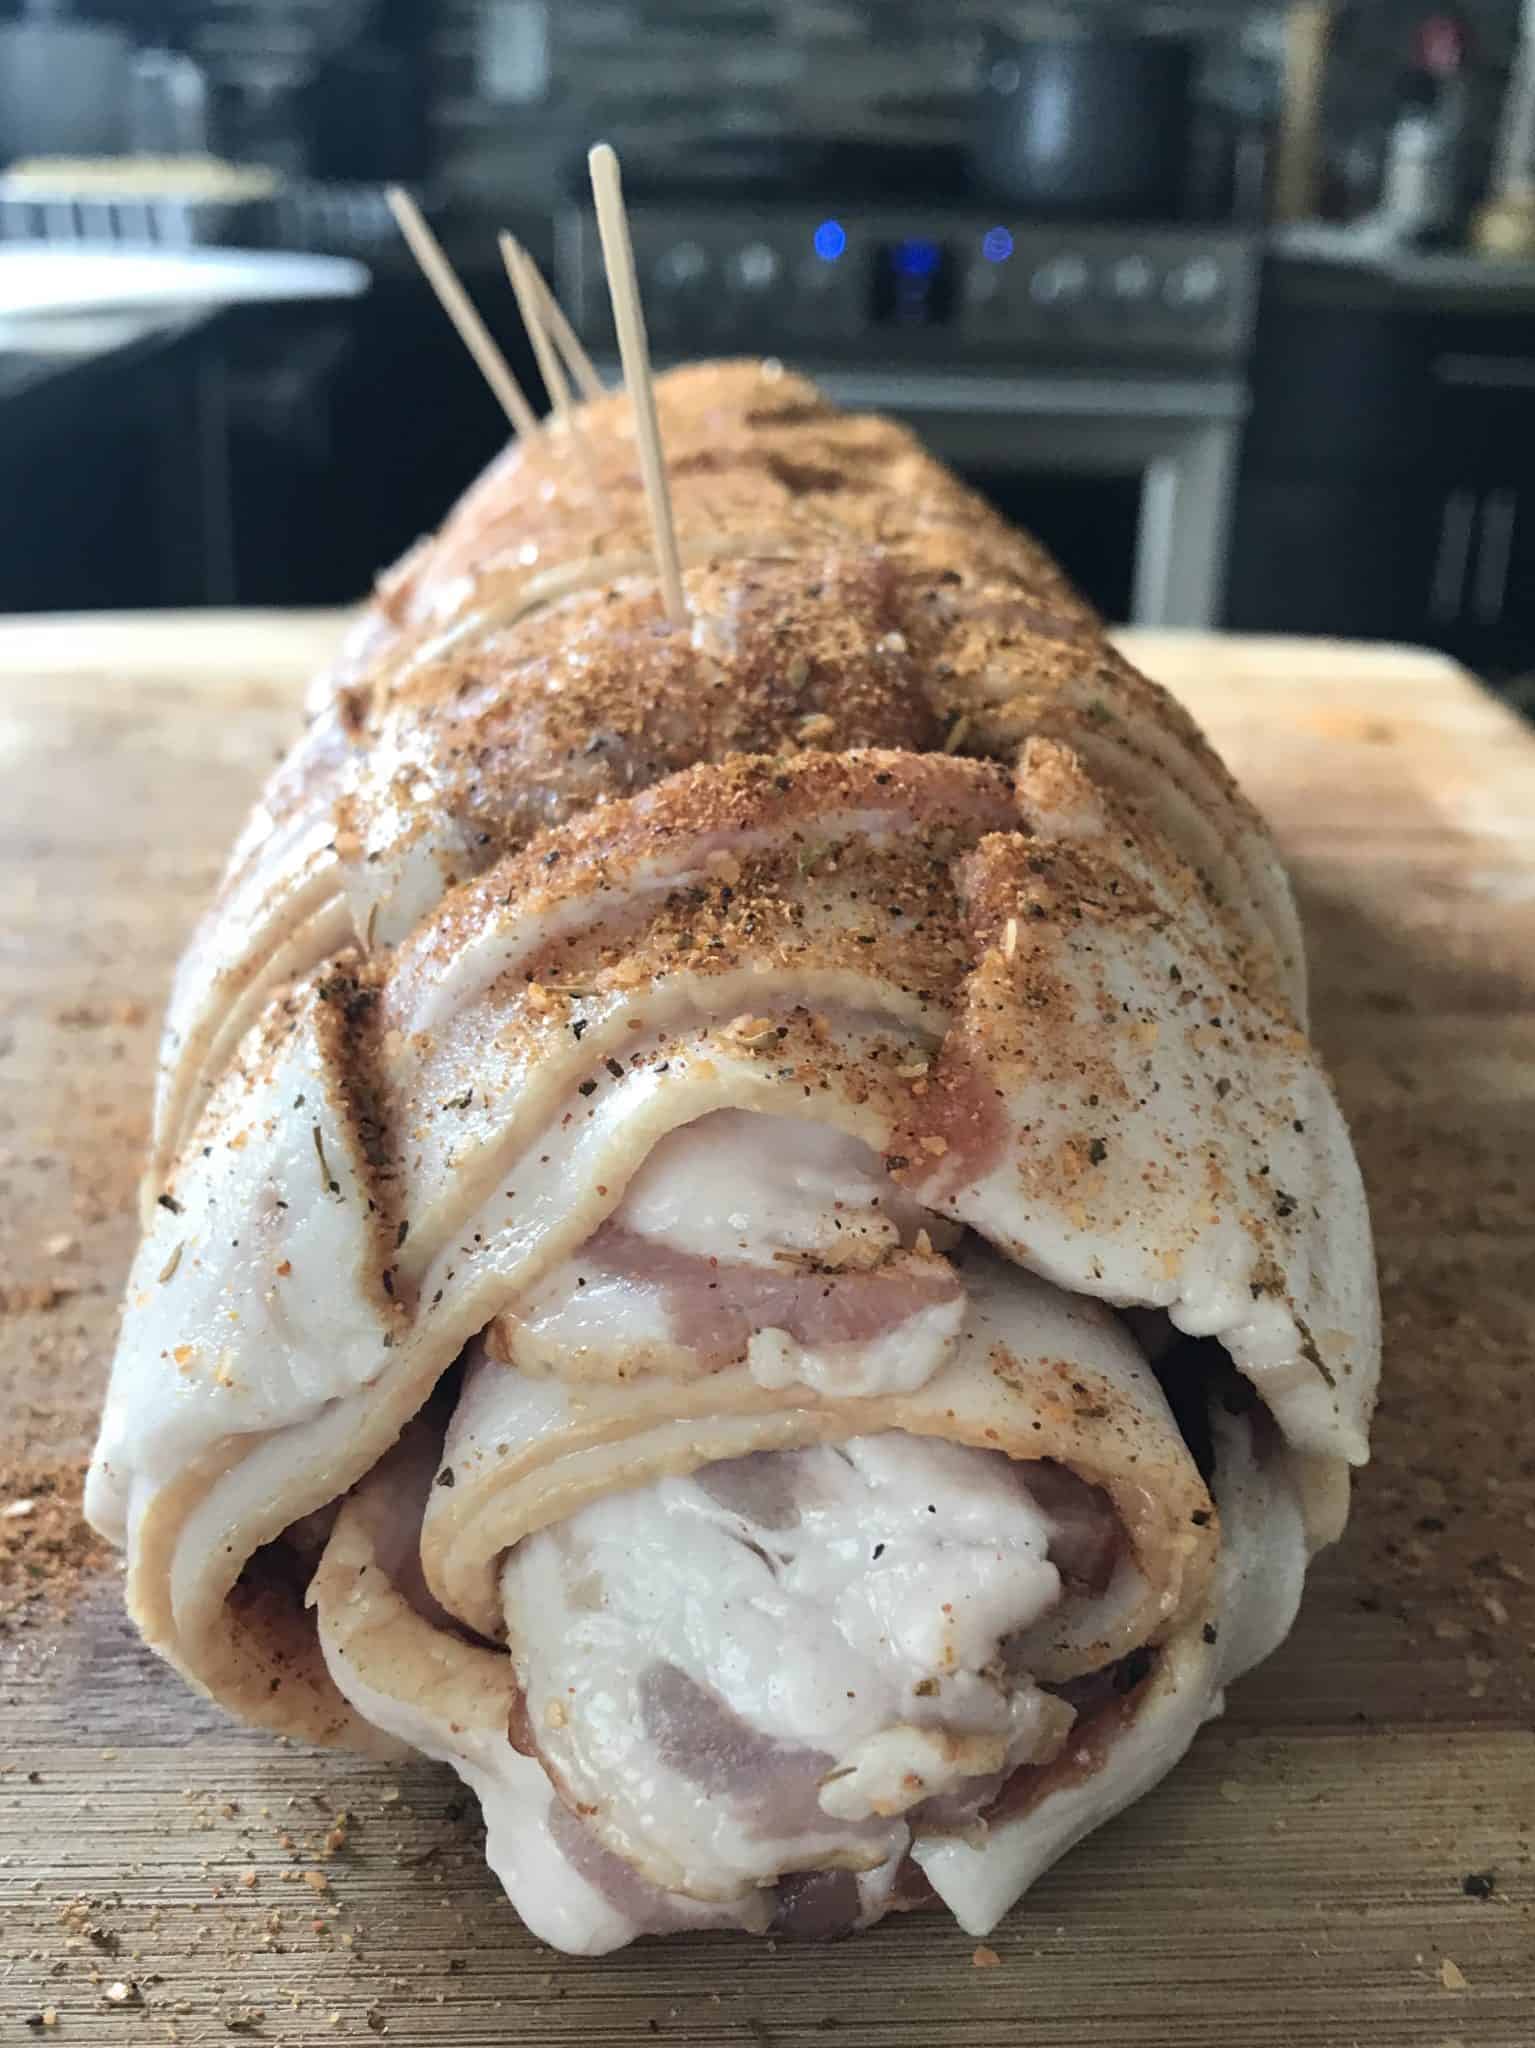 Bacon explosion rolled up with toothpicks holding it together side view